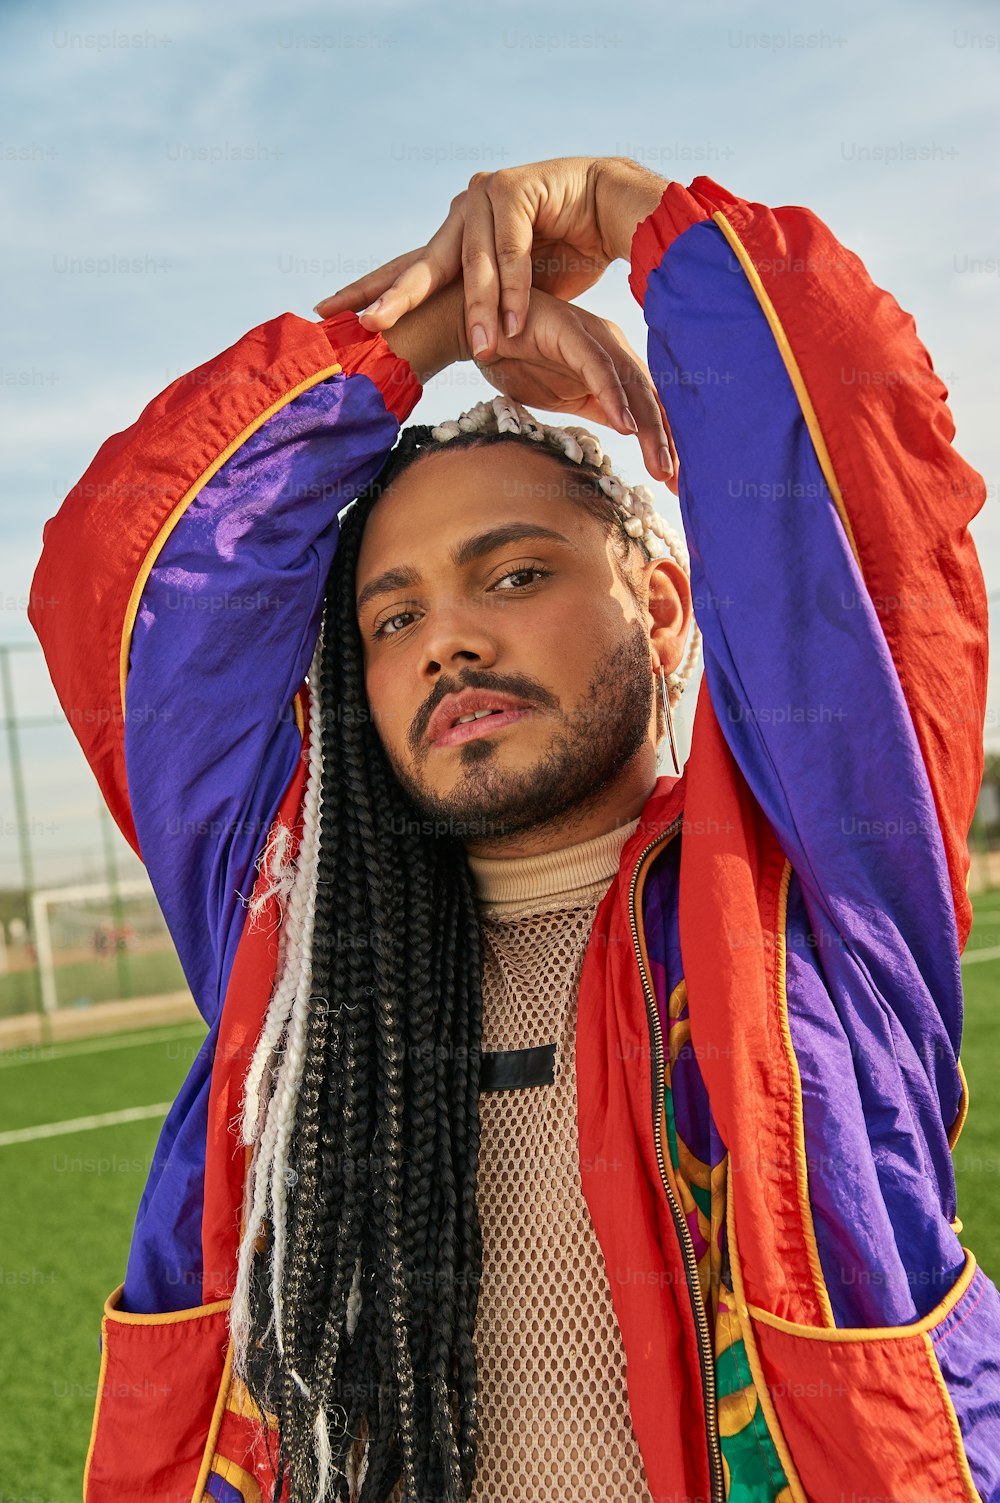 a man with dreadlocks and a jacket on